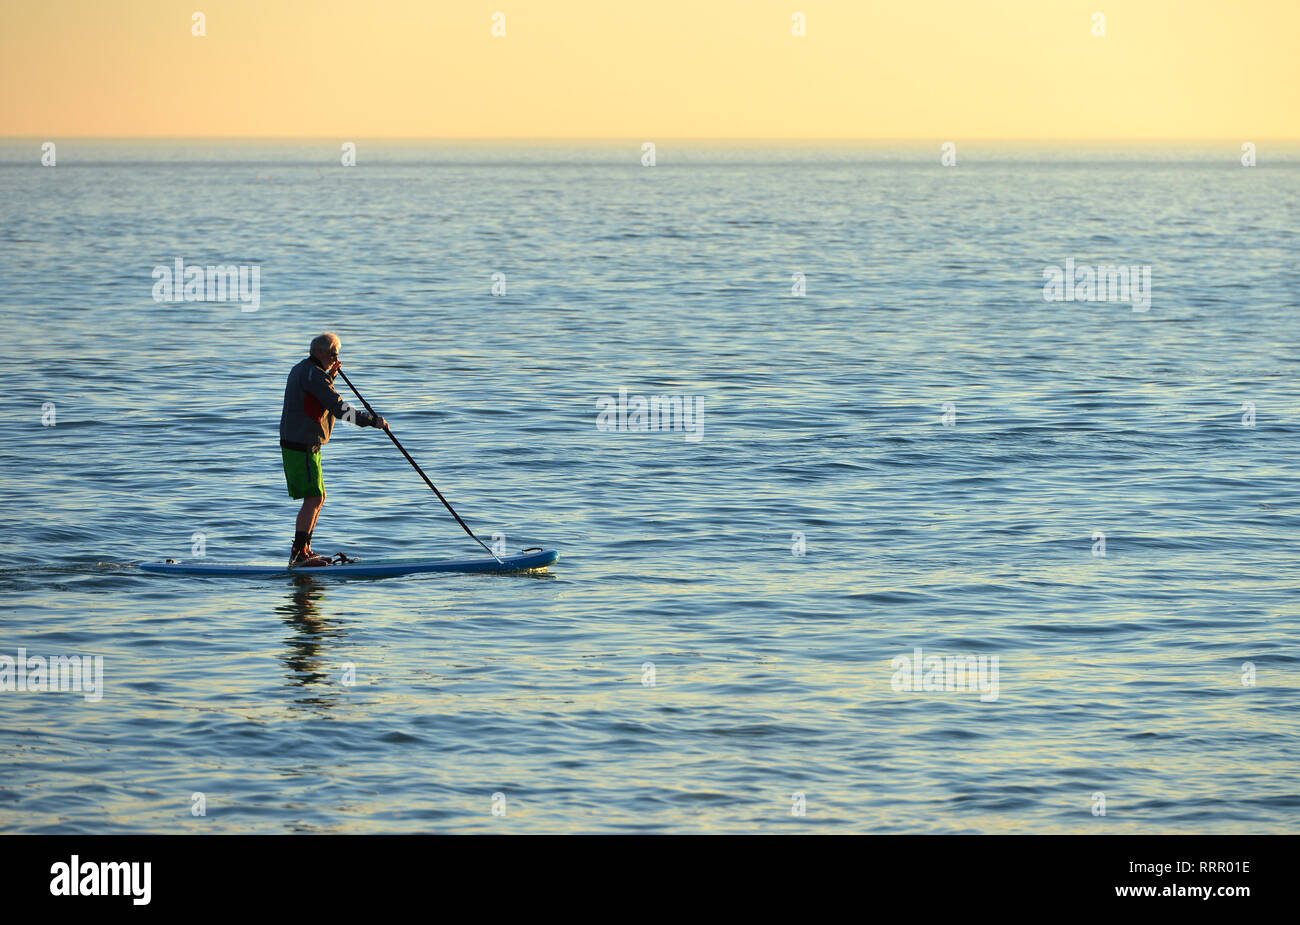 Seaford, East Sussex, UK. 26th Feb, 2019. A man in shorts paddle boarding in Seaford on the hottest winter day on record. Credit: Peter Cripps/Alamy Live News Stock Photo